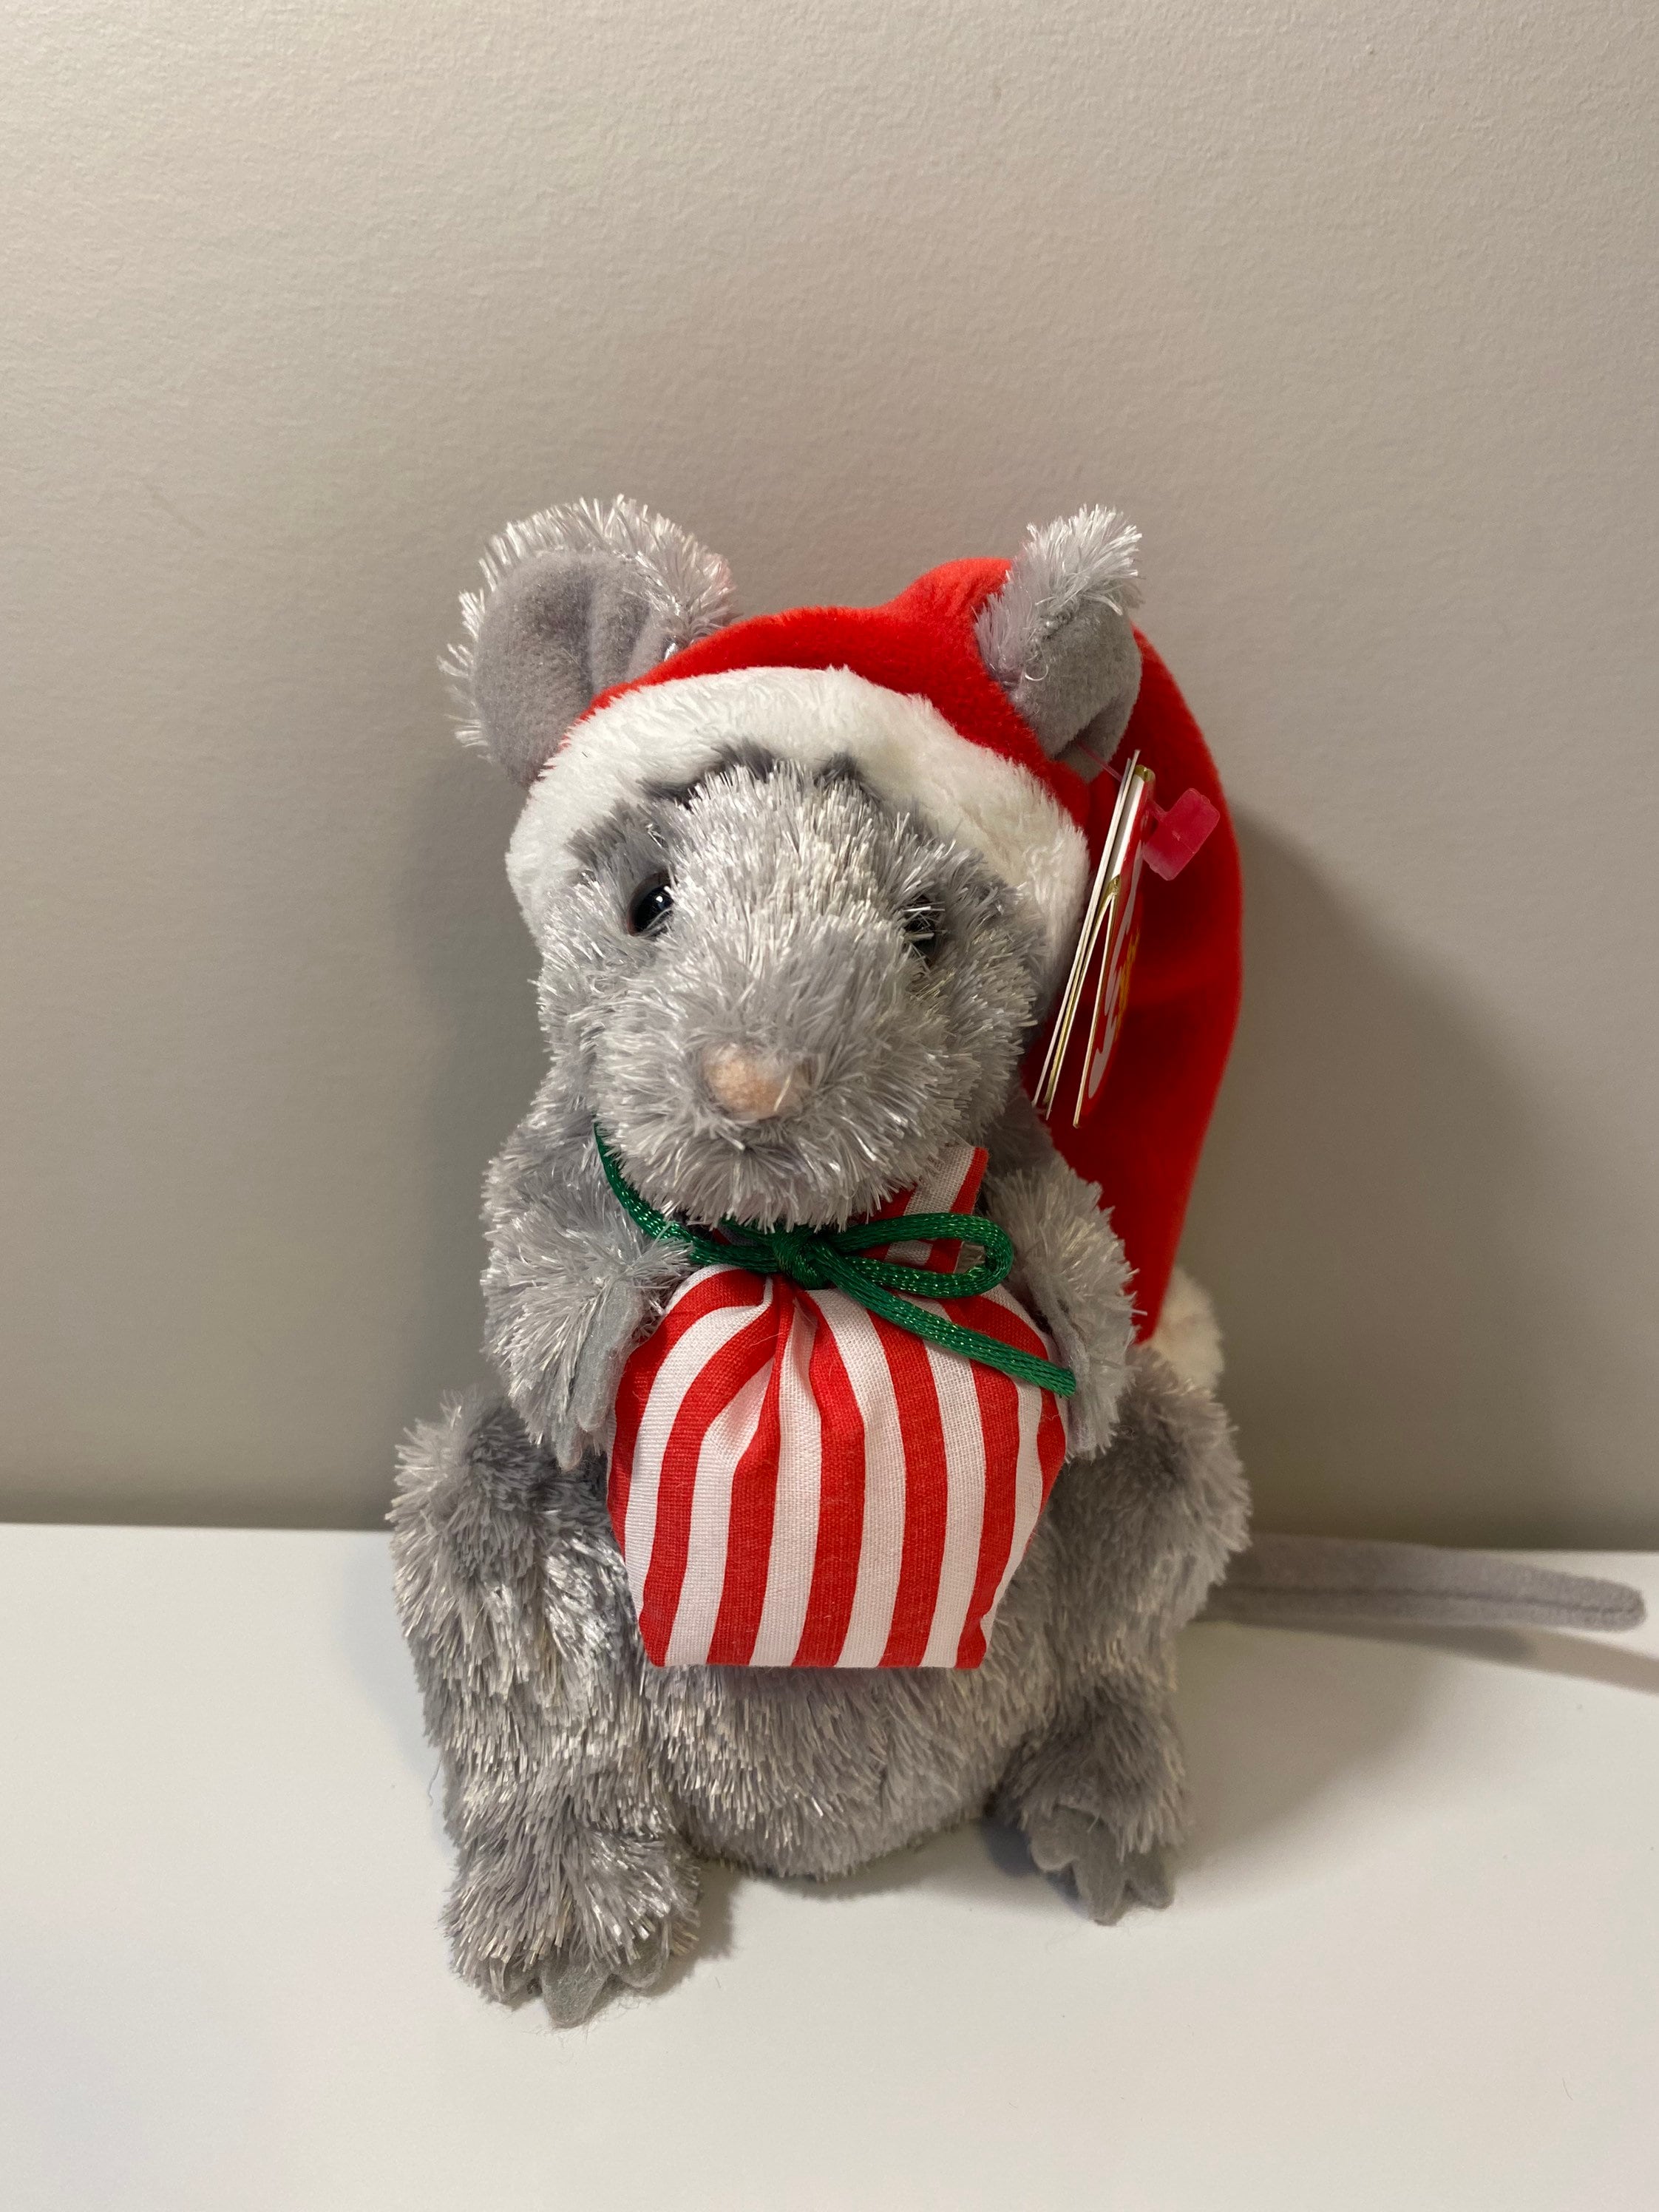 2005 Ty Beanie Baby Jinglemouse The Holiday Mouse for sale online 